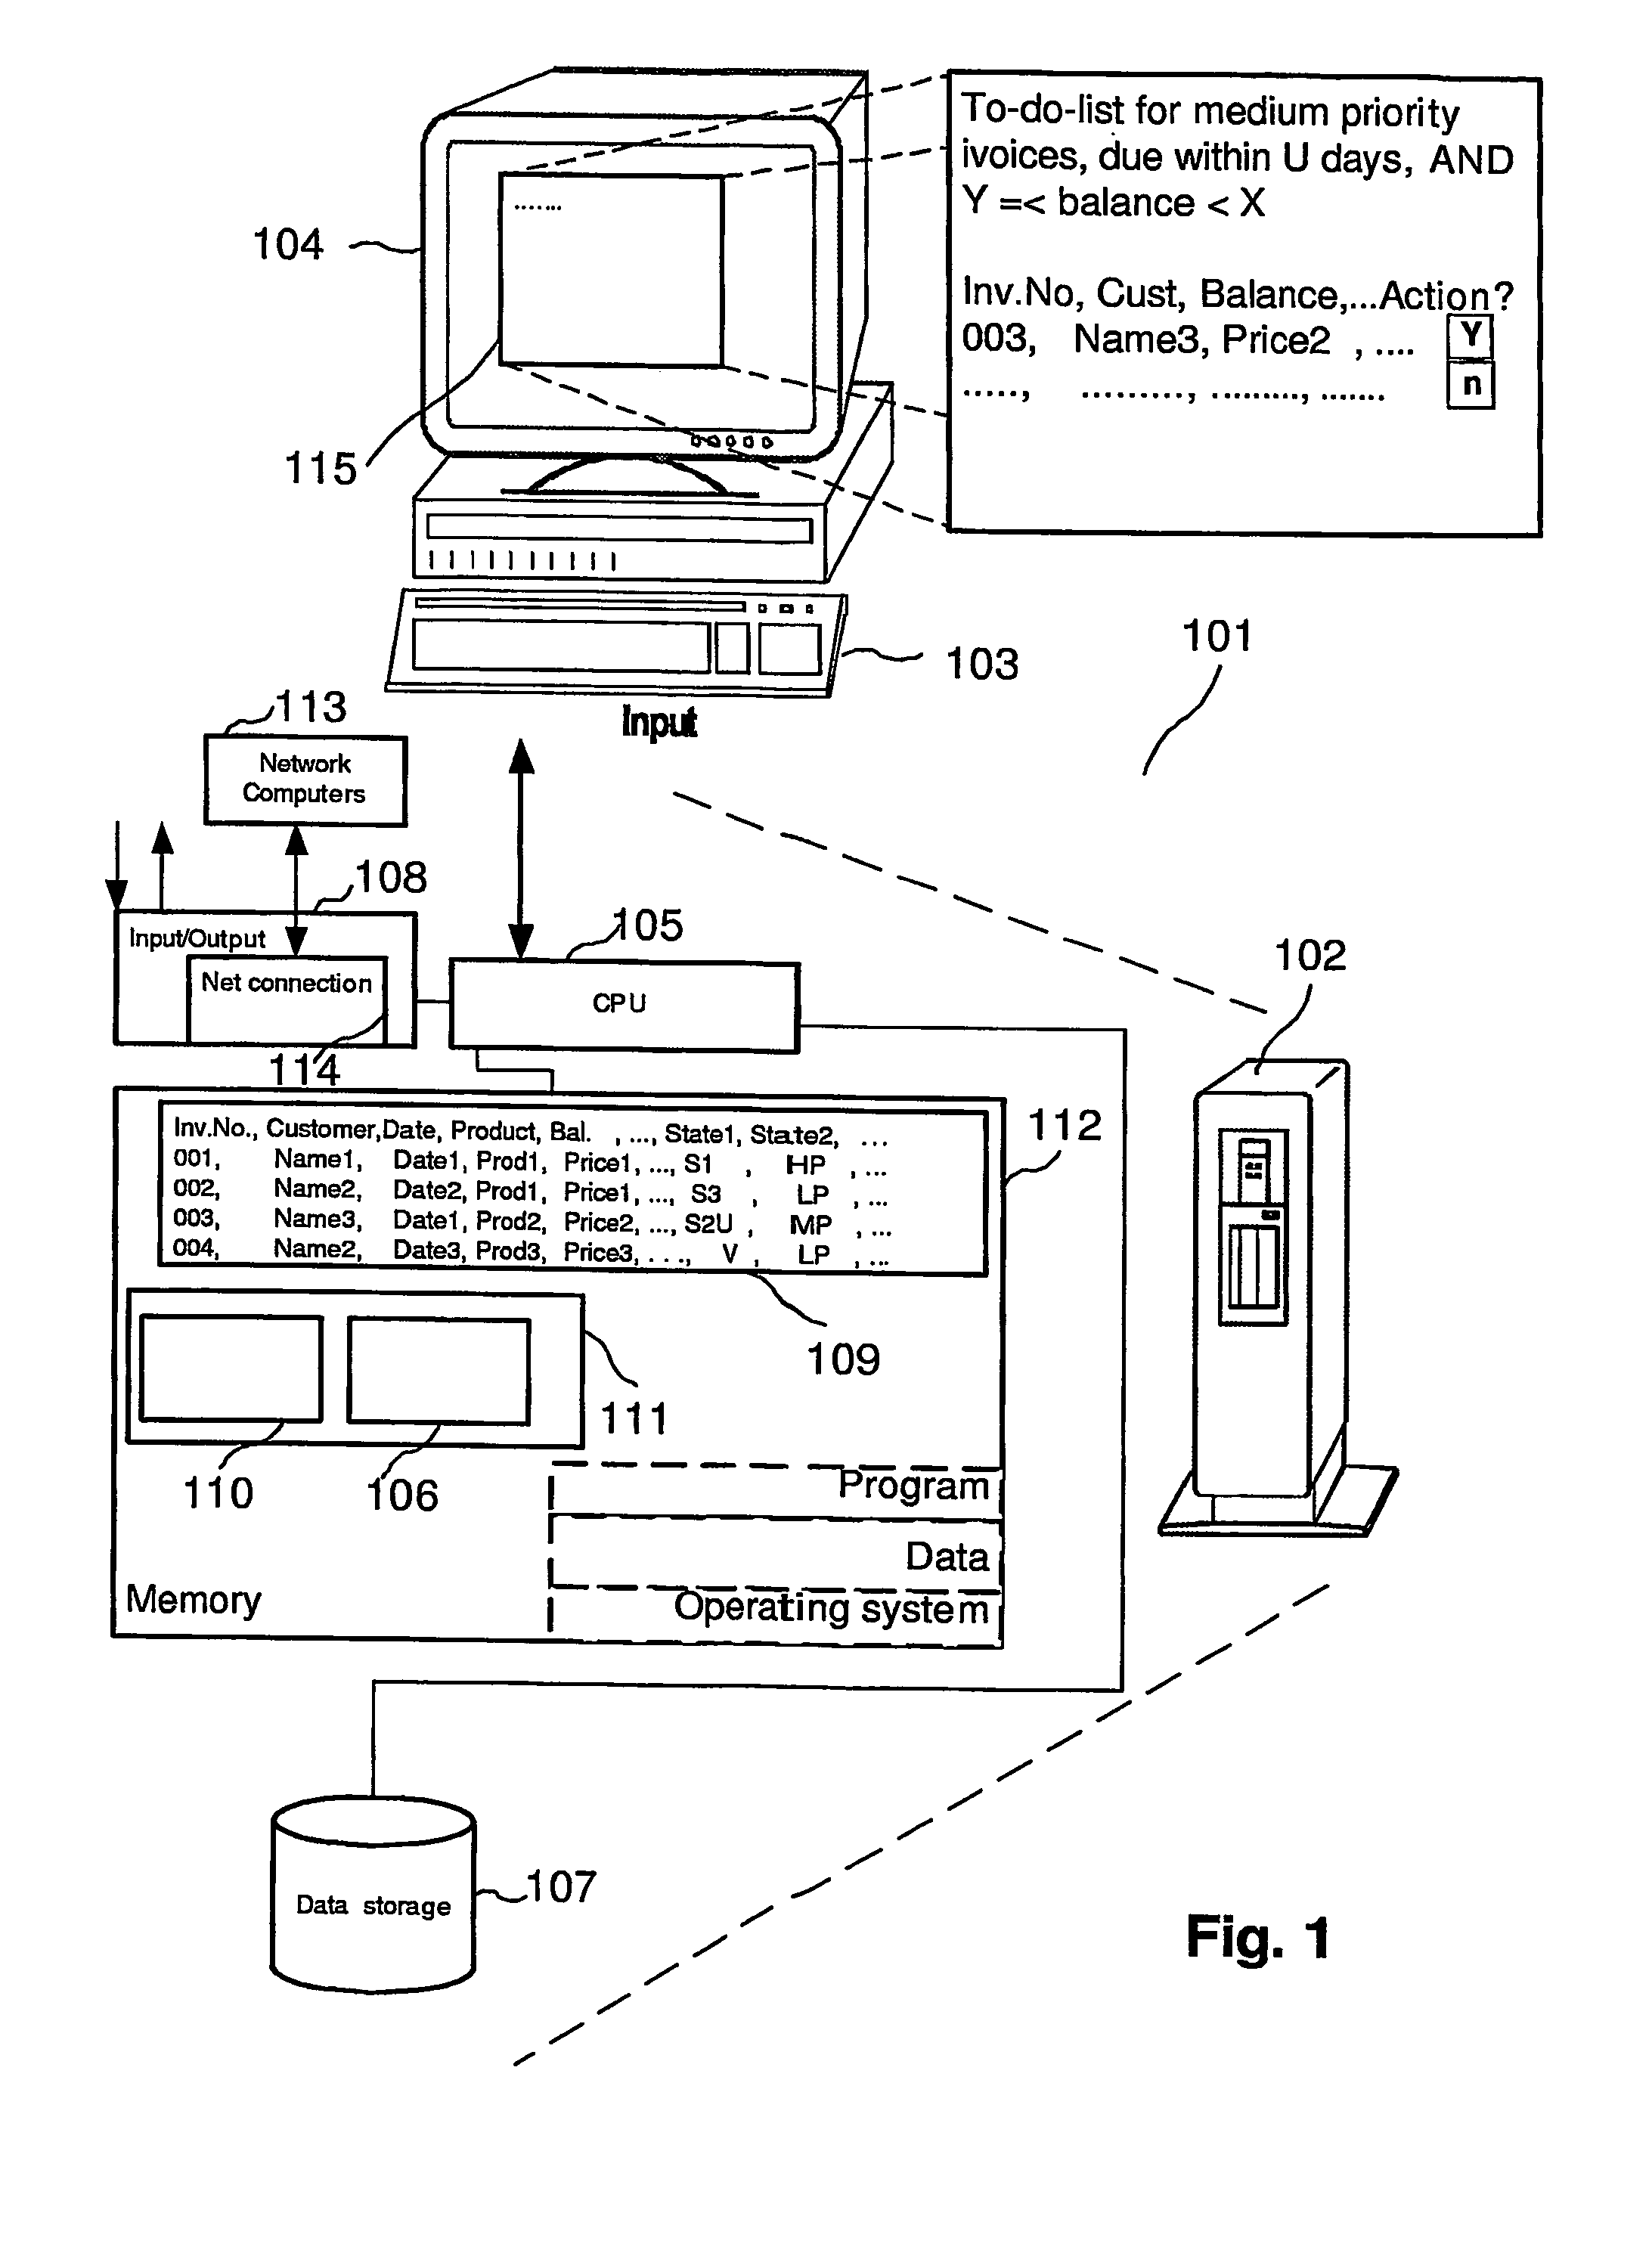 Method and software application for computer aided cutomer independent cash collection using a state field in a data record